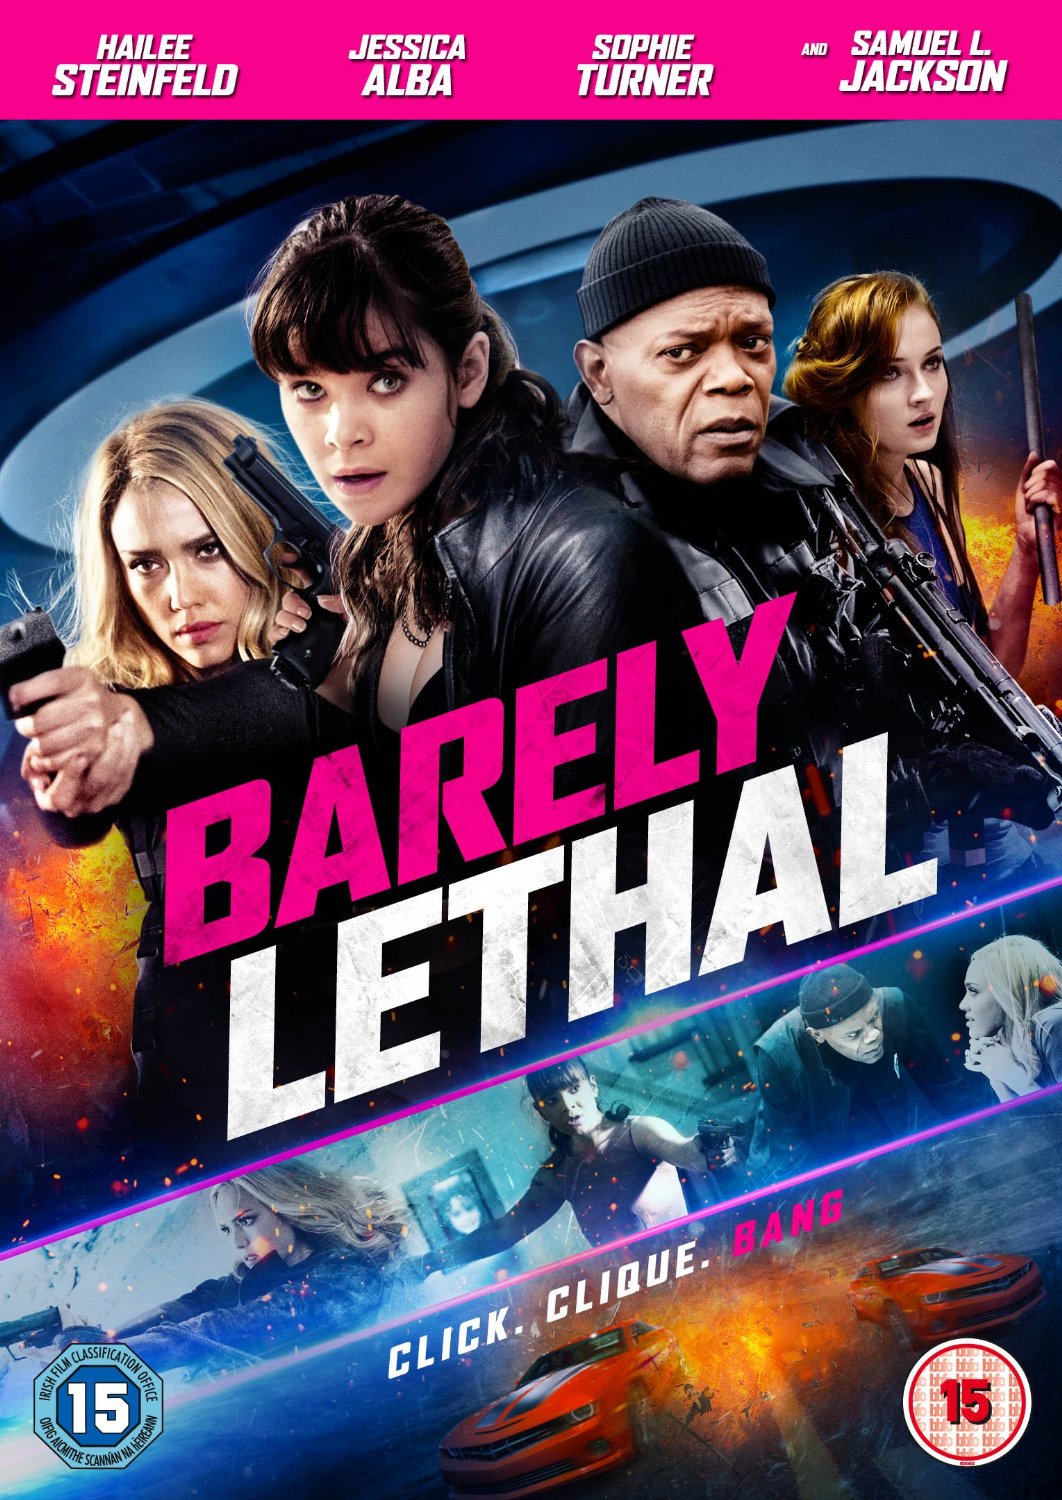 Barely Lethal (DVD)